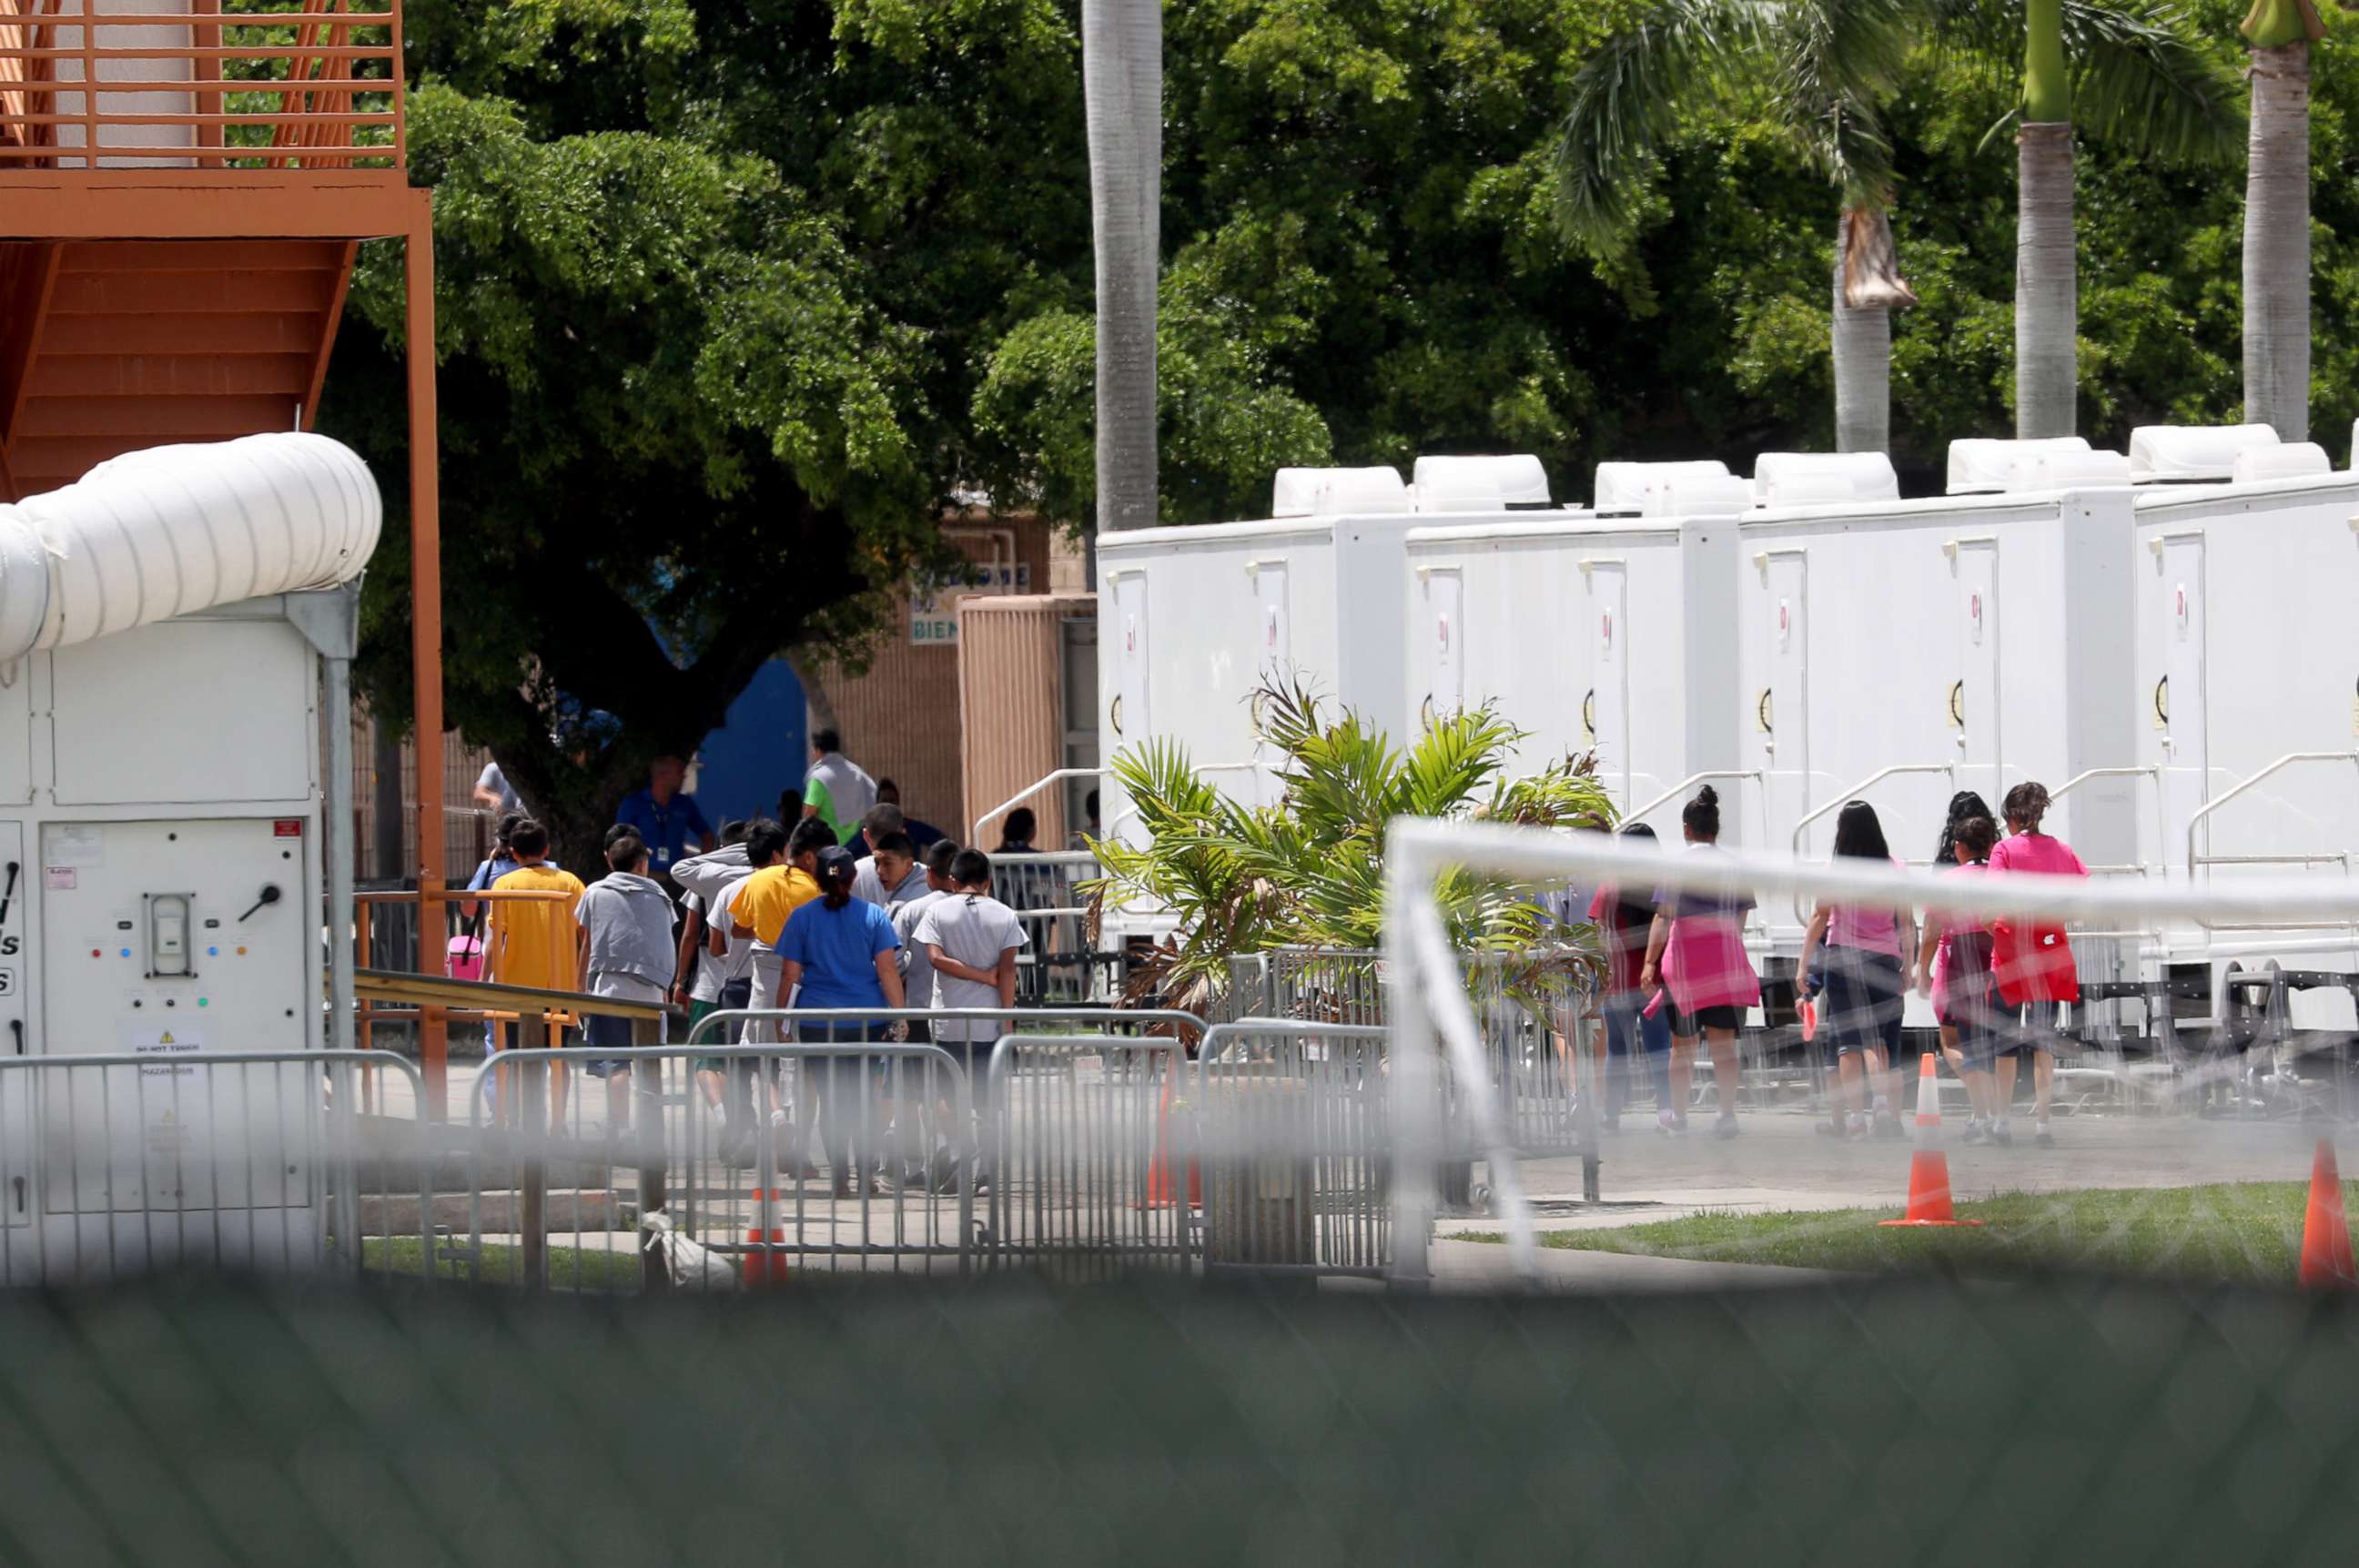 PHOTO: People walk inside the Homestead Temporary Shelter for Unaccompanied Children on June 19, 2018 in Homestead, Fla.